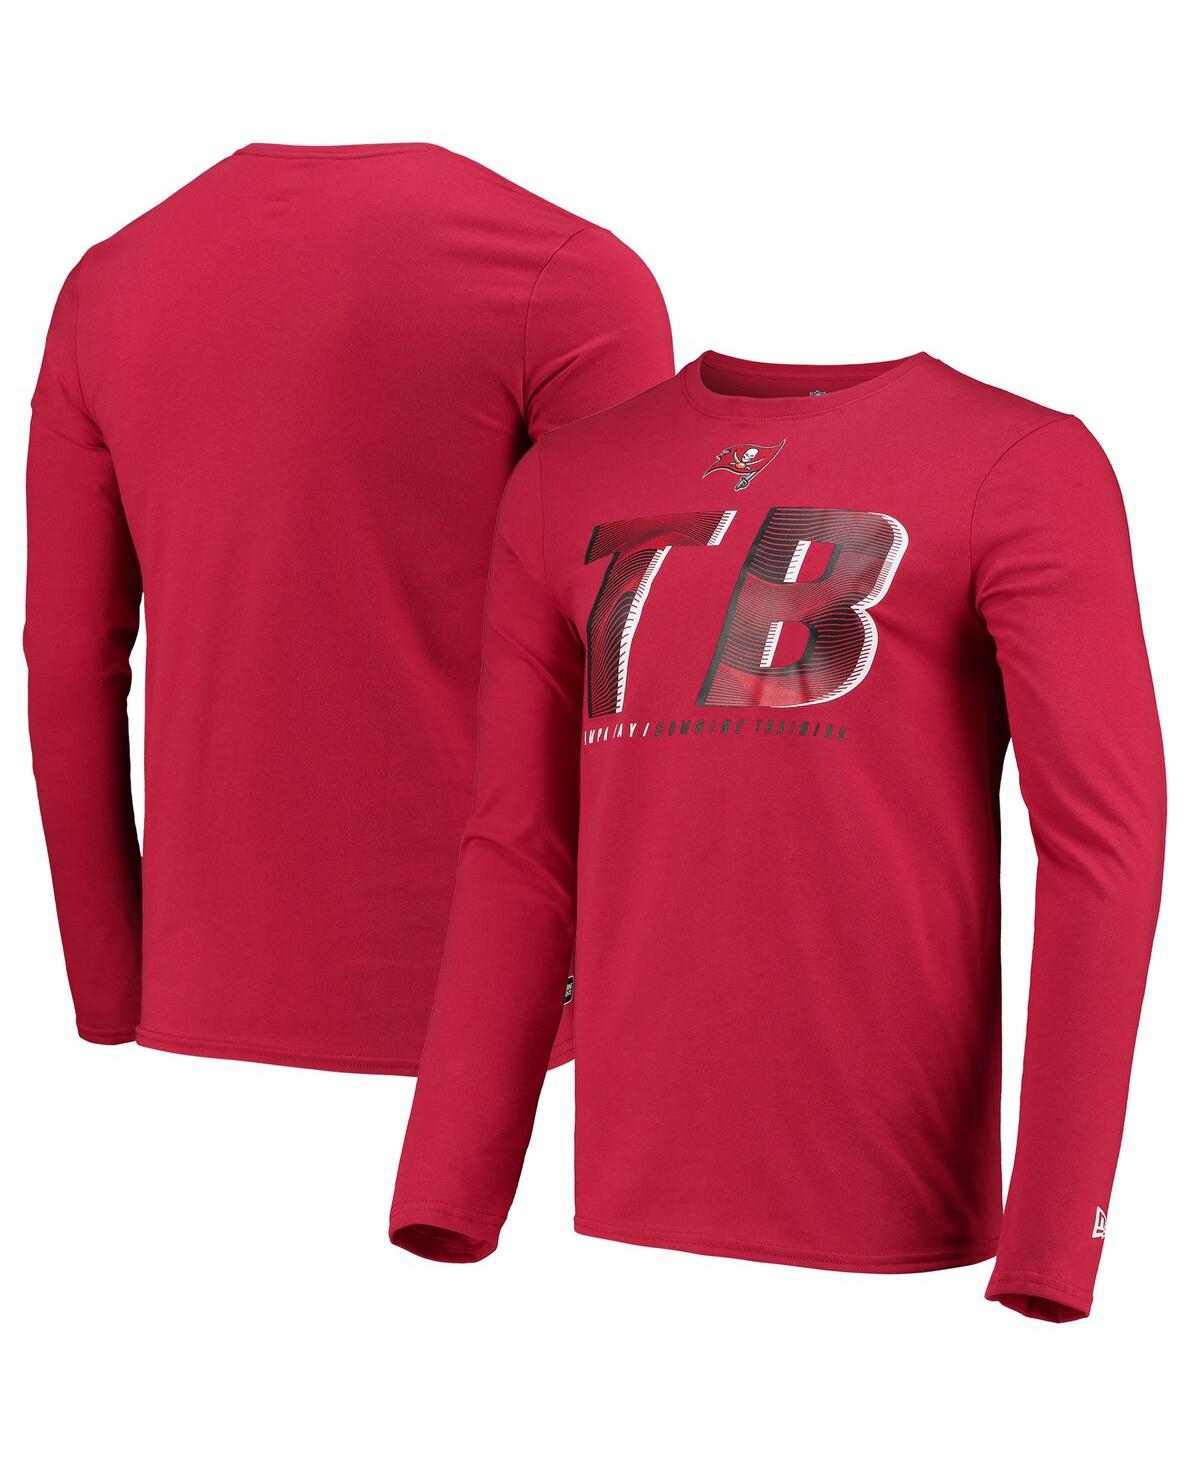 Shop New Era Men's  Red Tampa Bay Buccaneers Combine Authentic Static Abbreviation Long Sleeve T-shirt